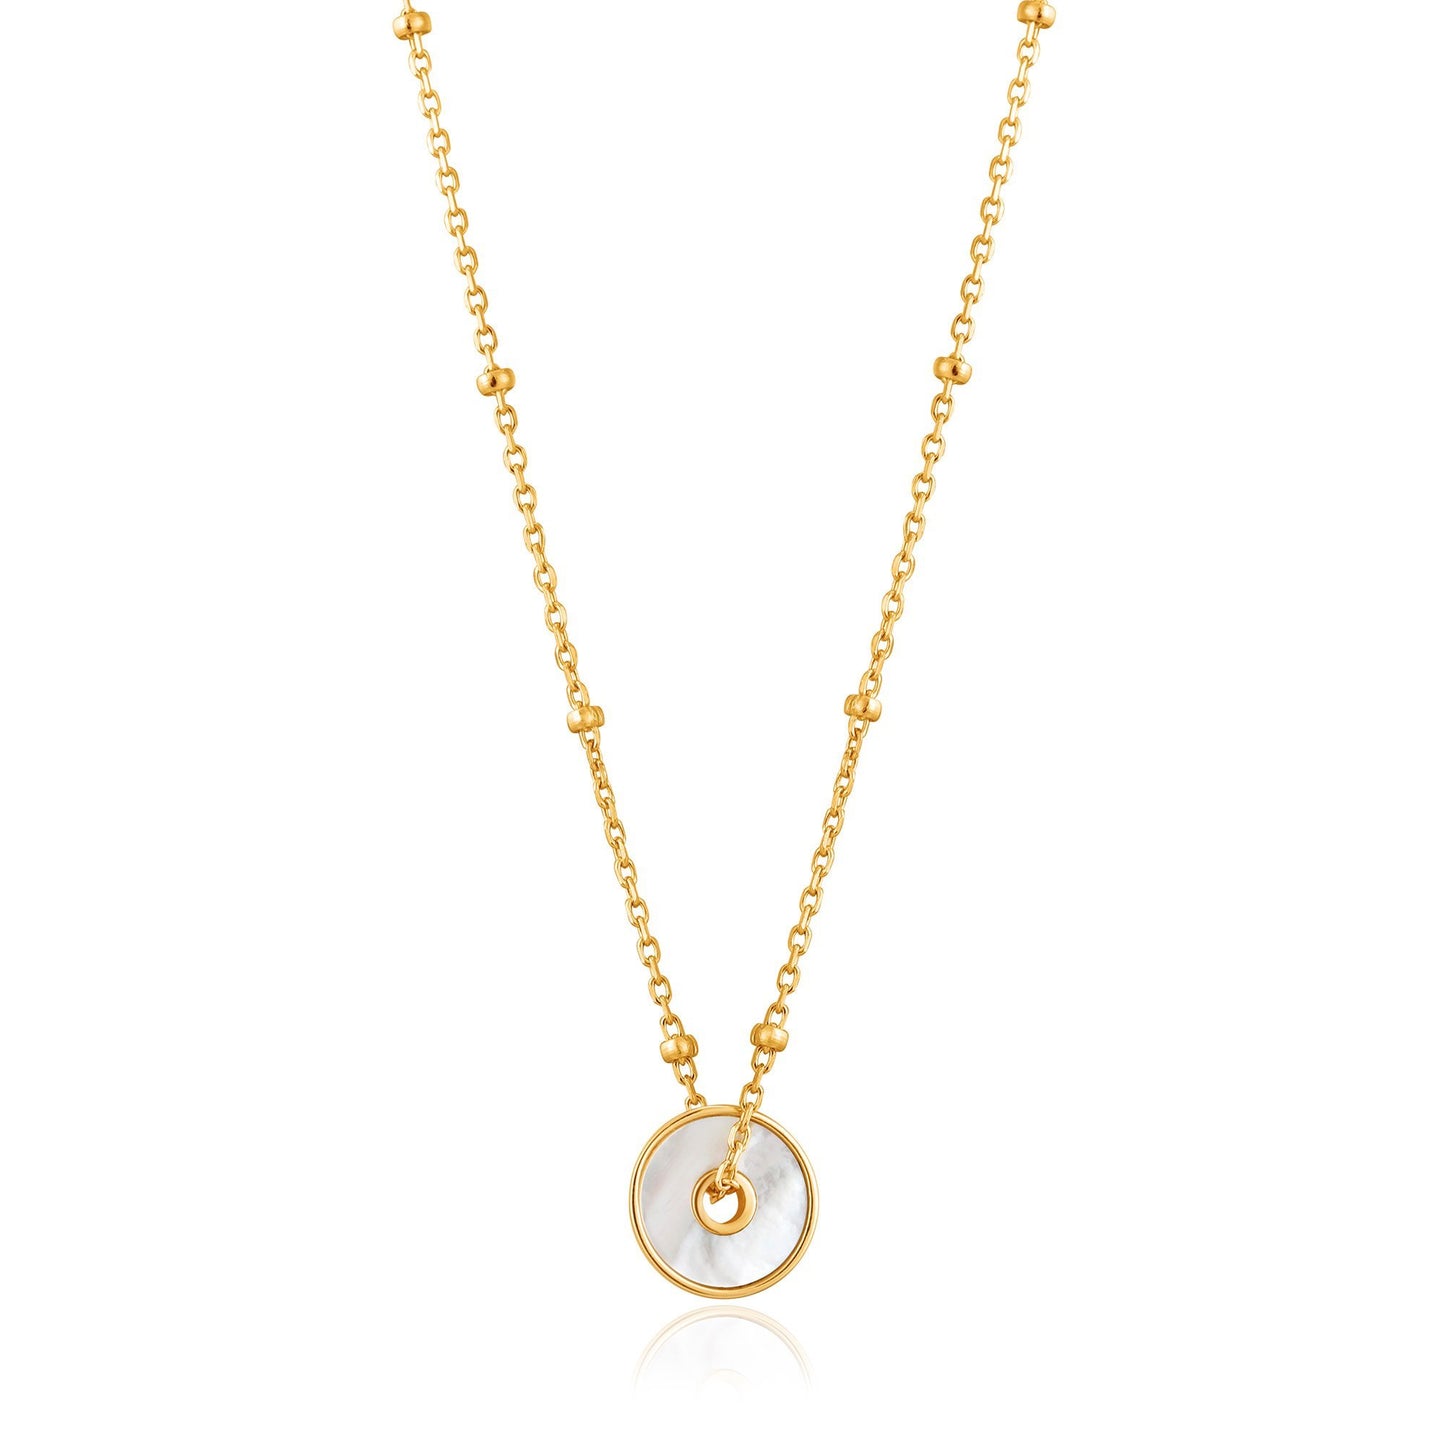 ANIA HAIE ANIA HAIE - Gold Mother Of Pearl Disc Necklace available at The Good Life Boutique